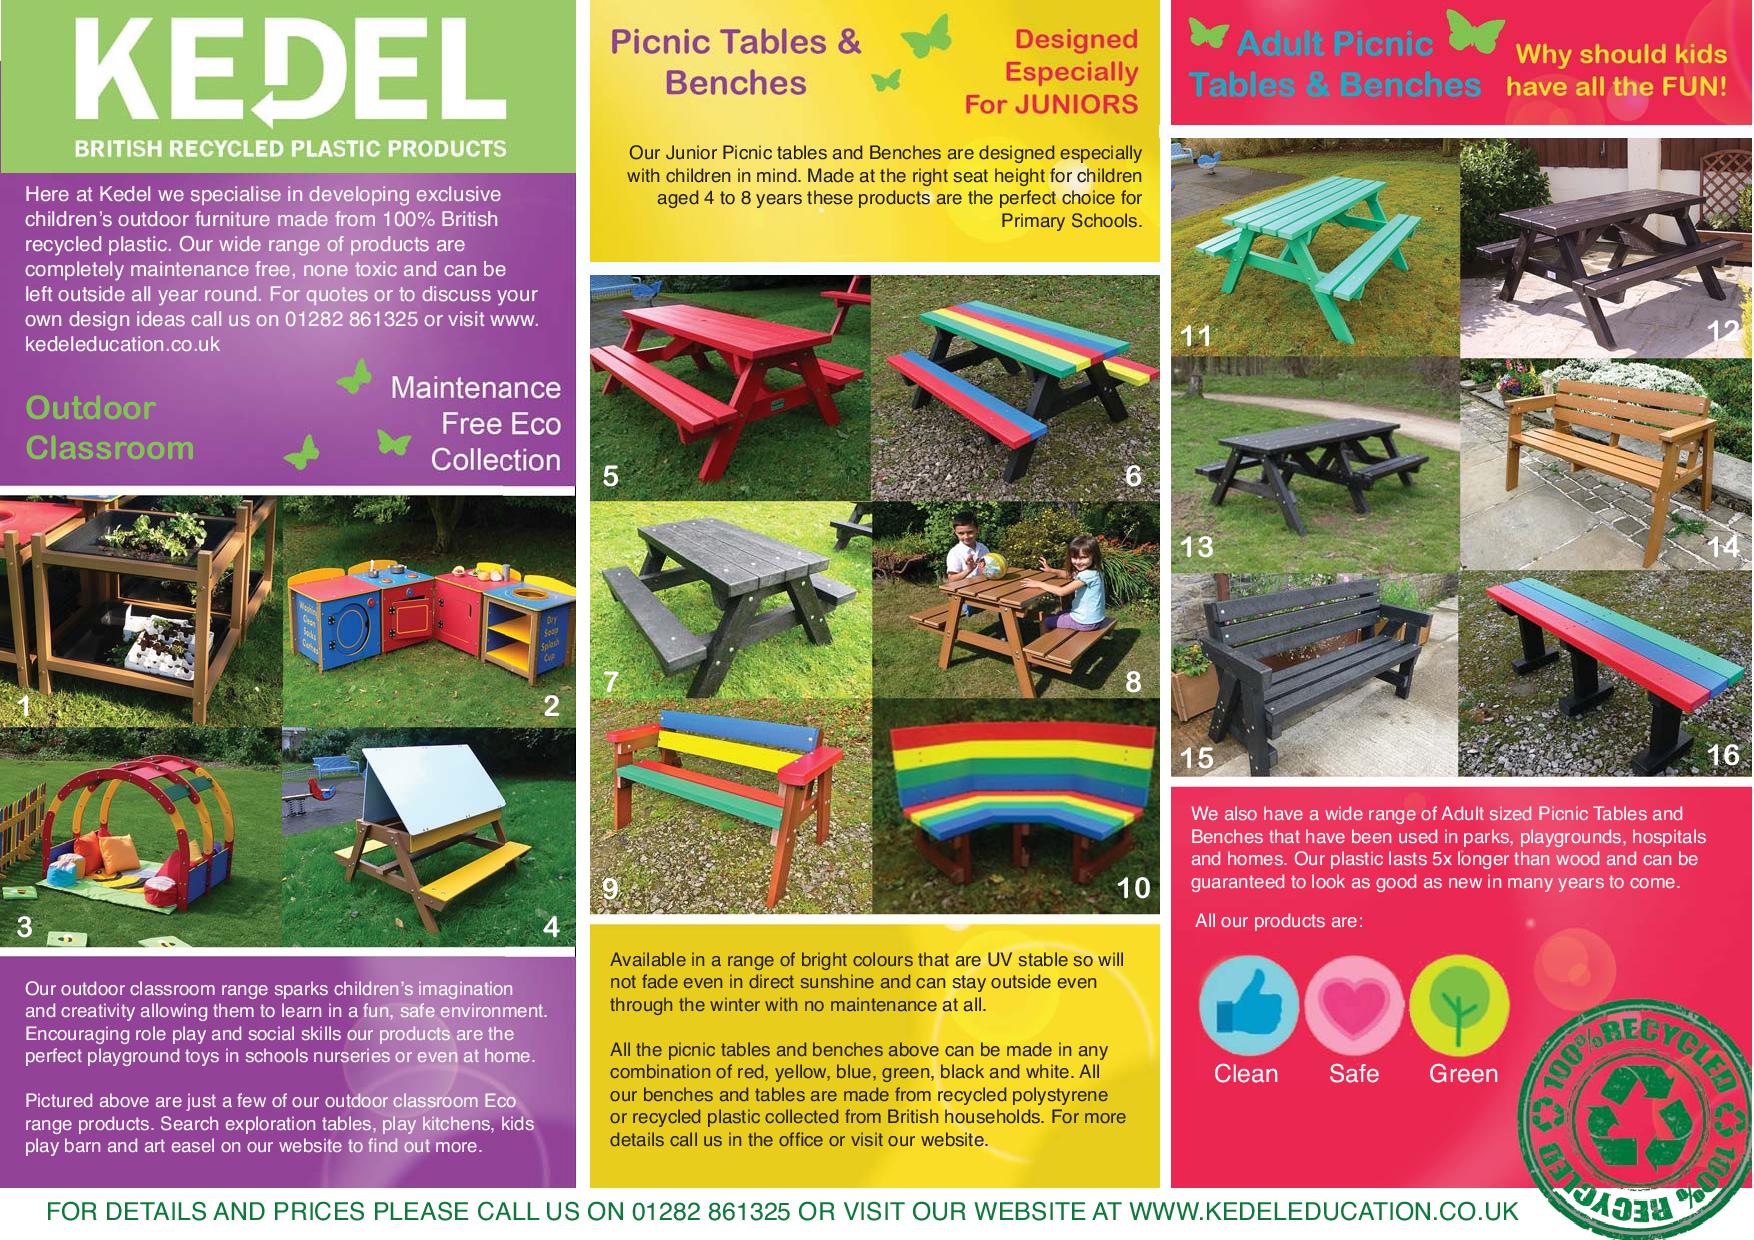 Recycled plastic for education - key advantages leaflet